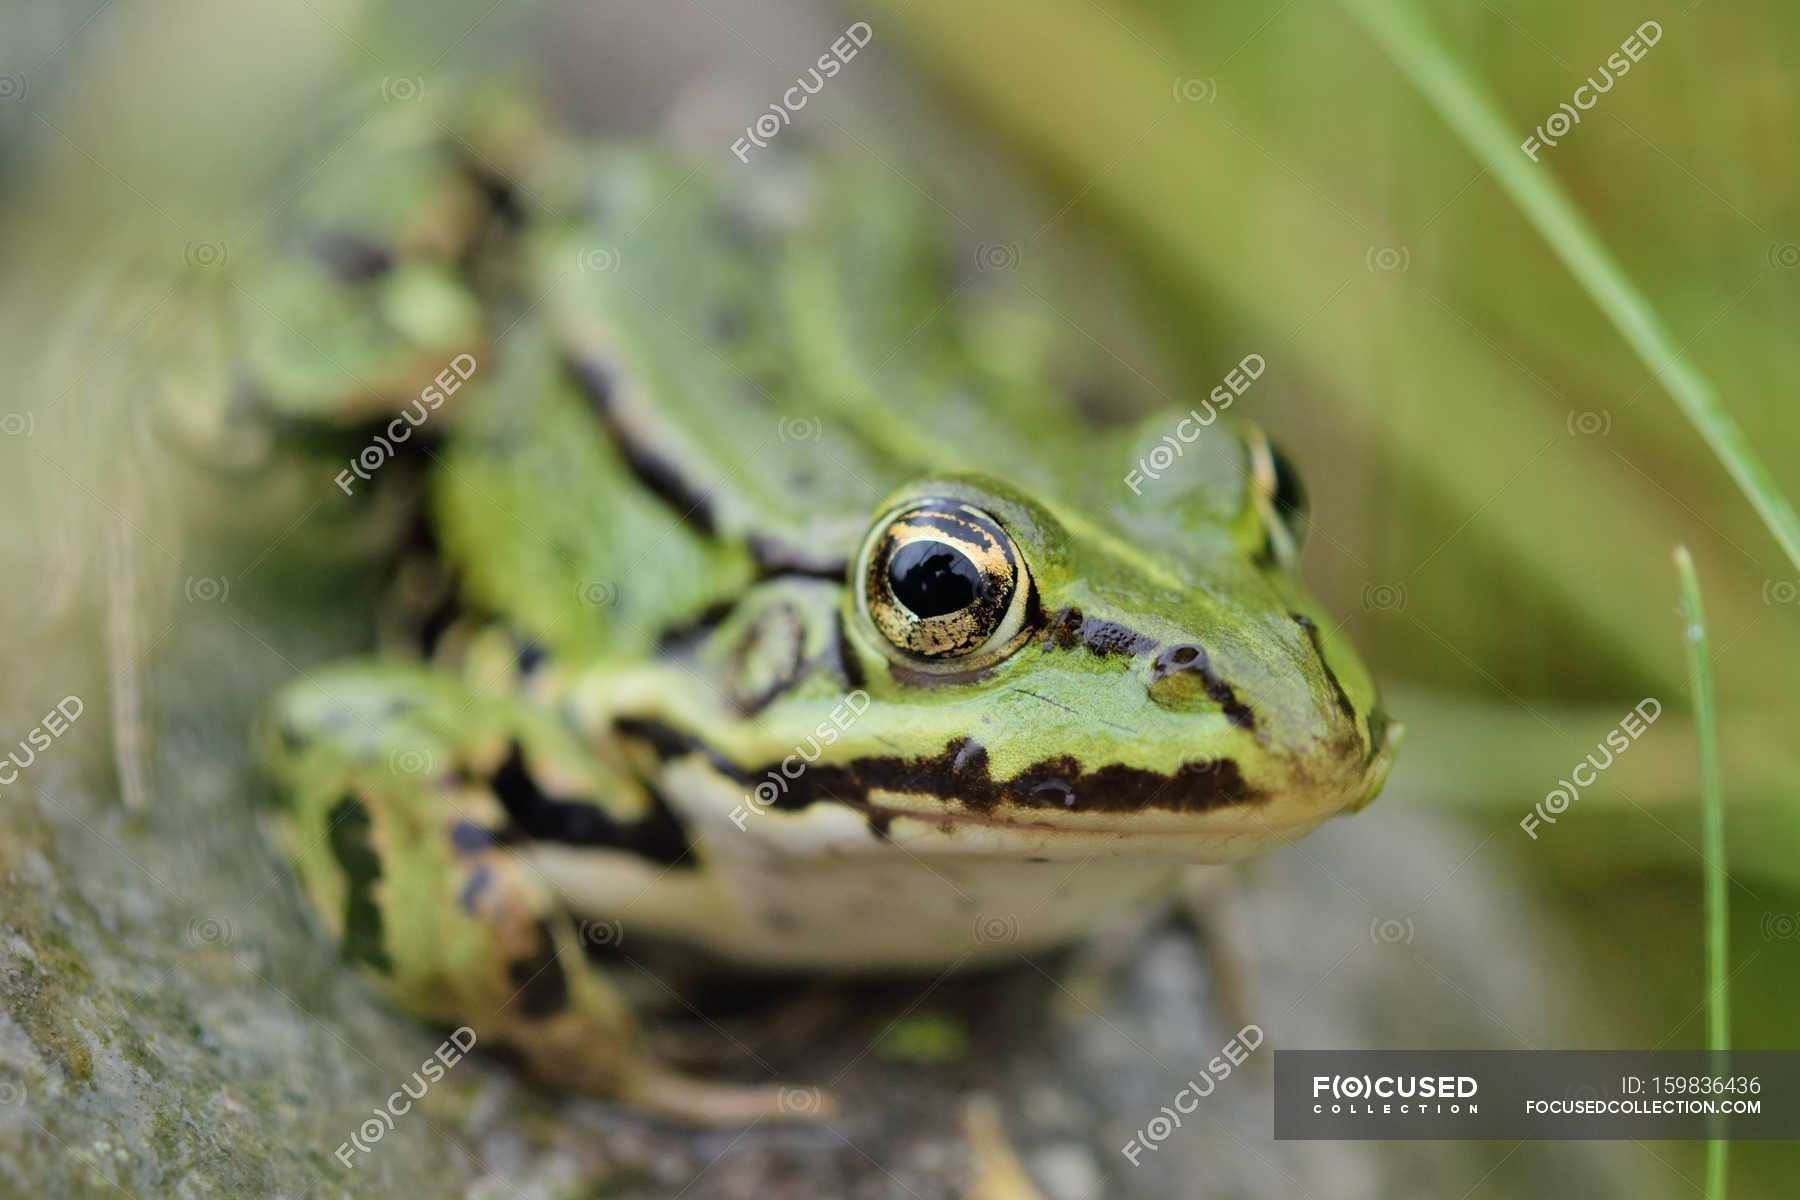 Frog in wild nature — Stock Photo | #159836436